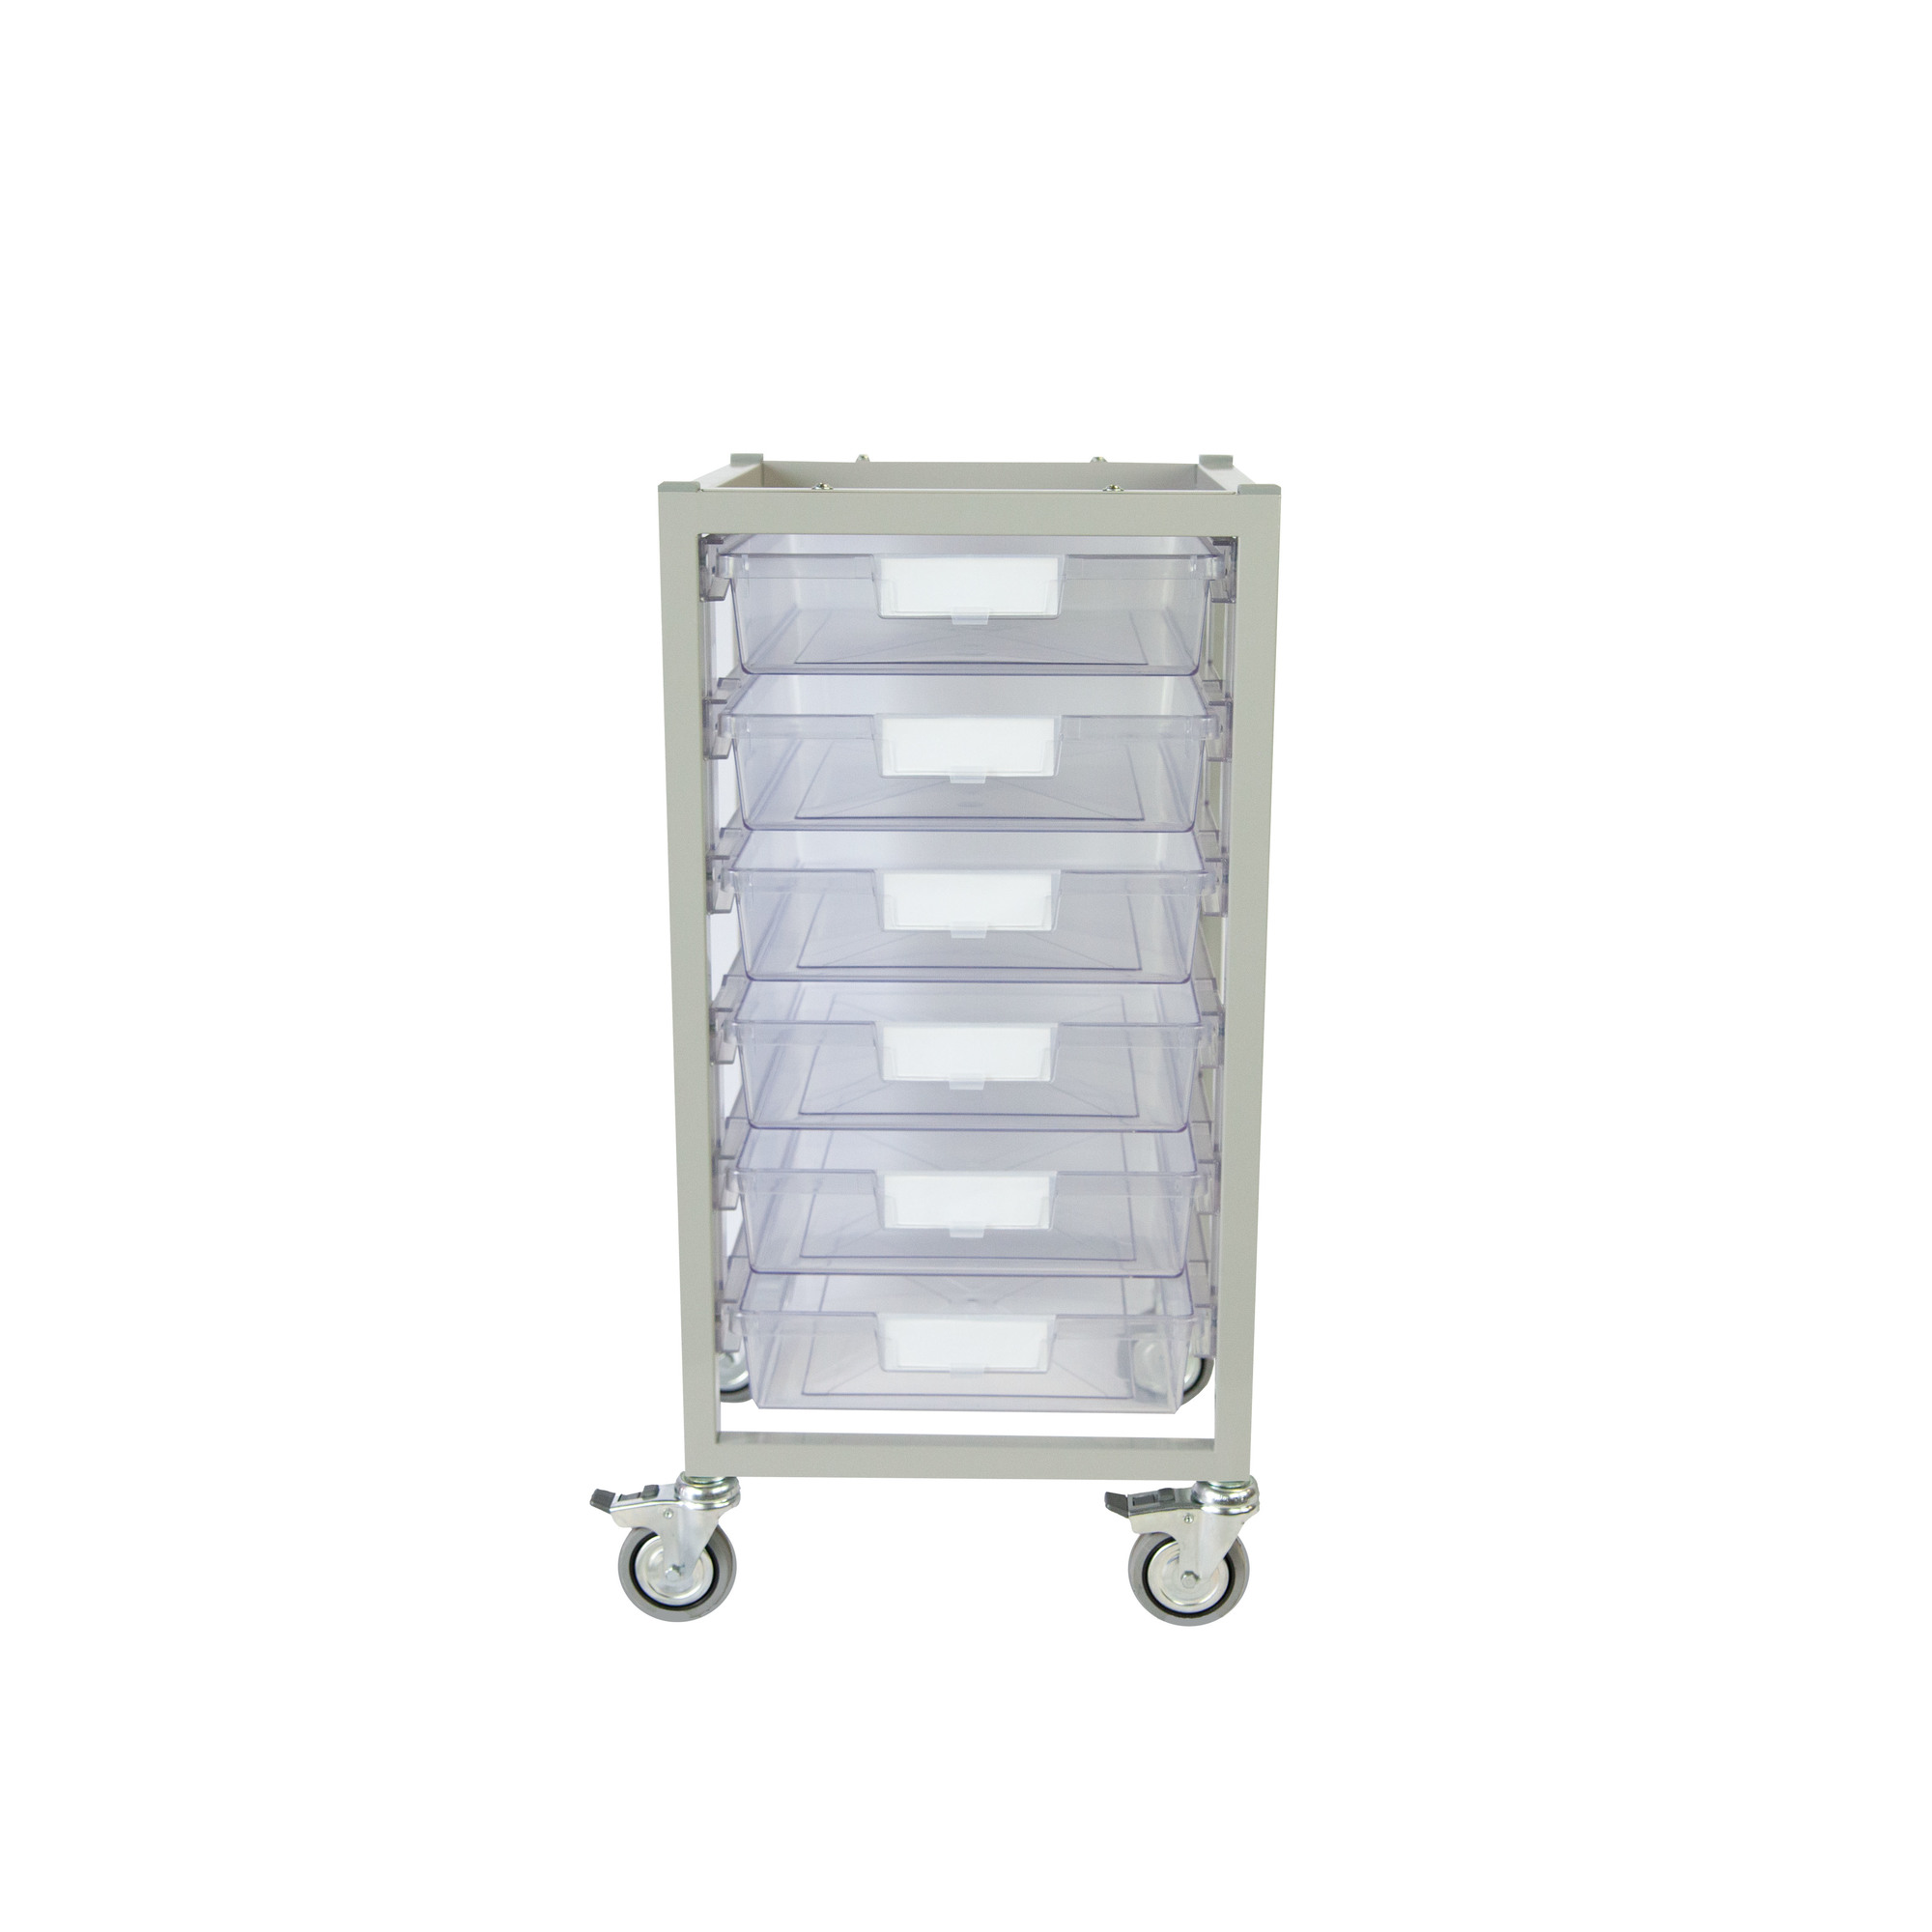 Certwood, Nimble Cart Slim-Gray with 6 Gray Trays, Included (qty.) 1, Material Steel, Height 15.75 in, Model CE2100LG-6SLG